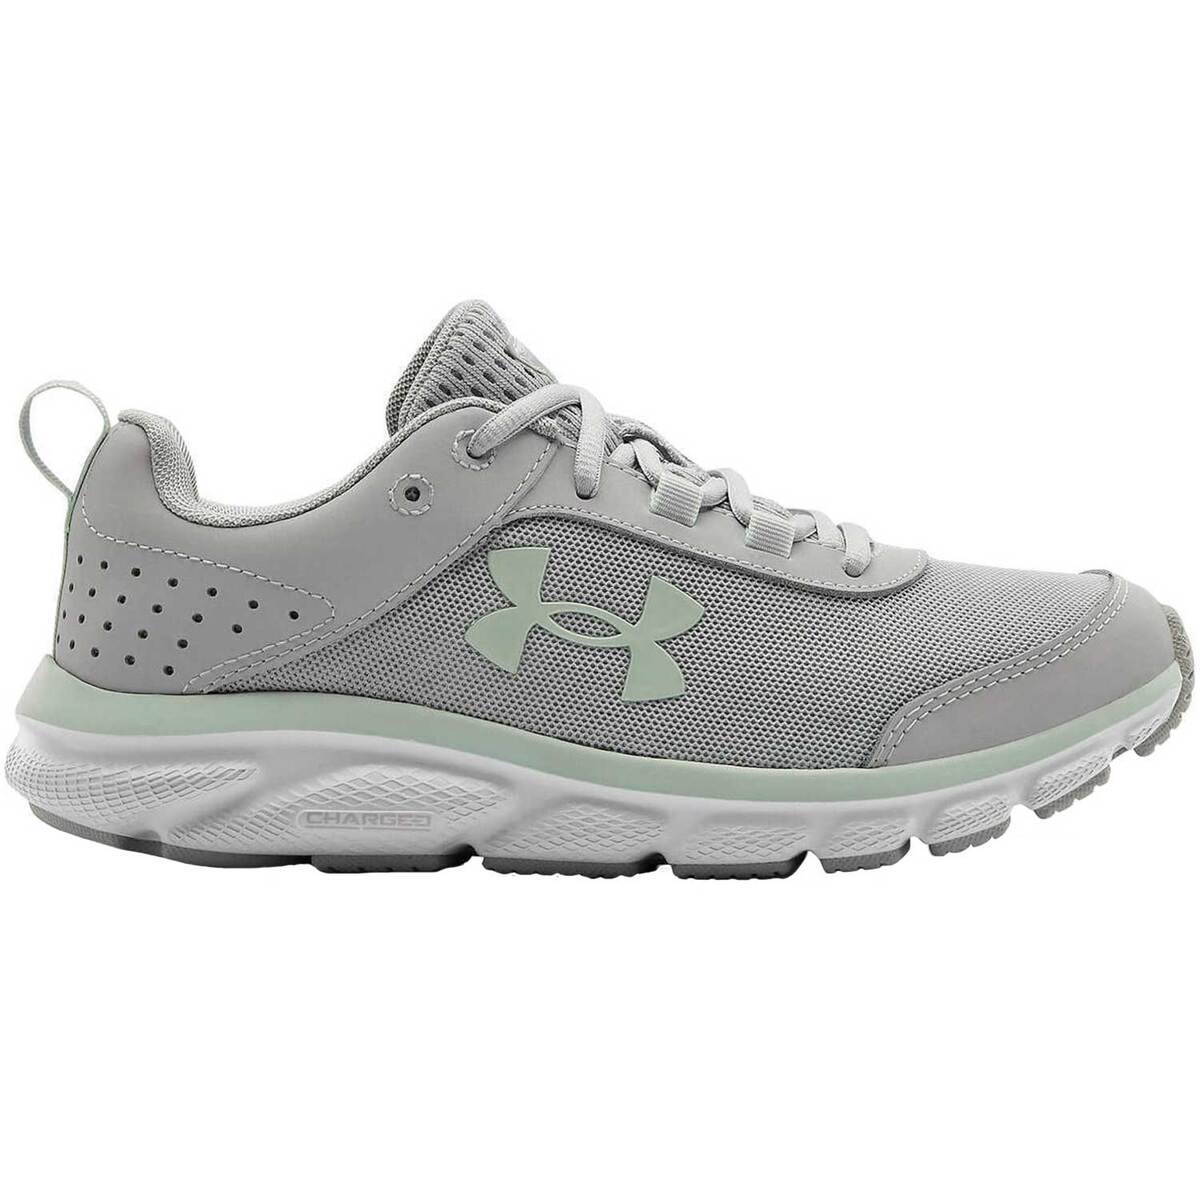 Under Armour Women's Charged Assert 8 Low Running Shoes | Sportsman's ...